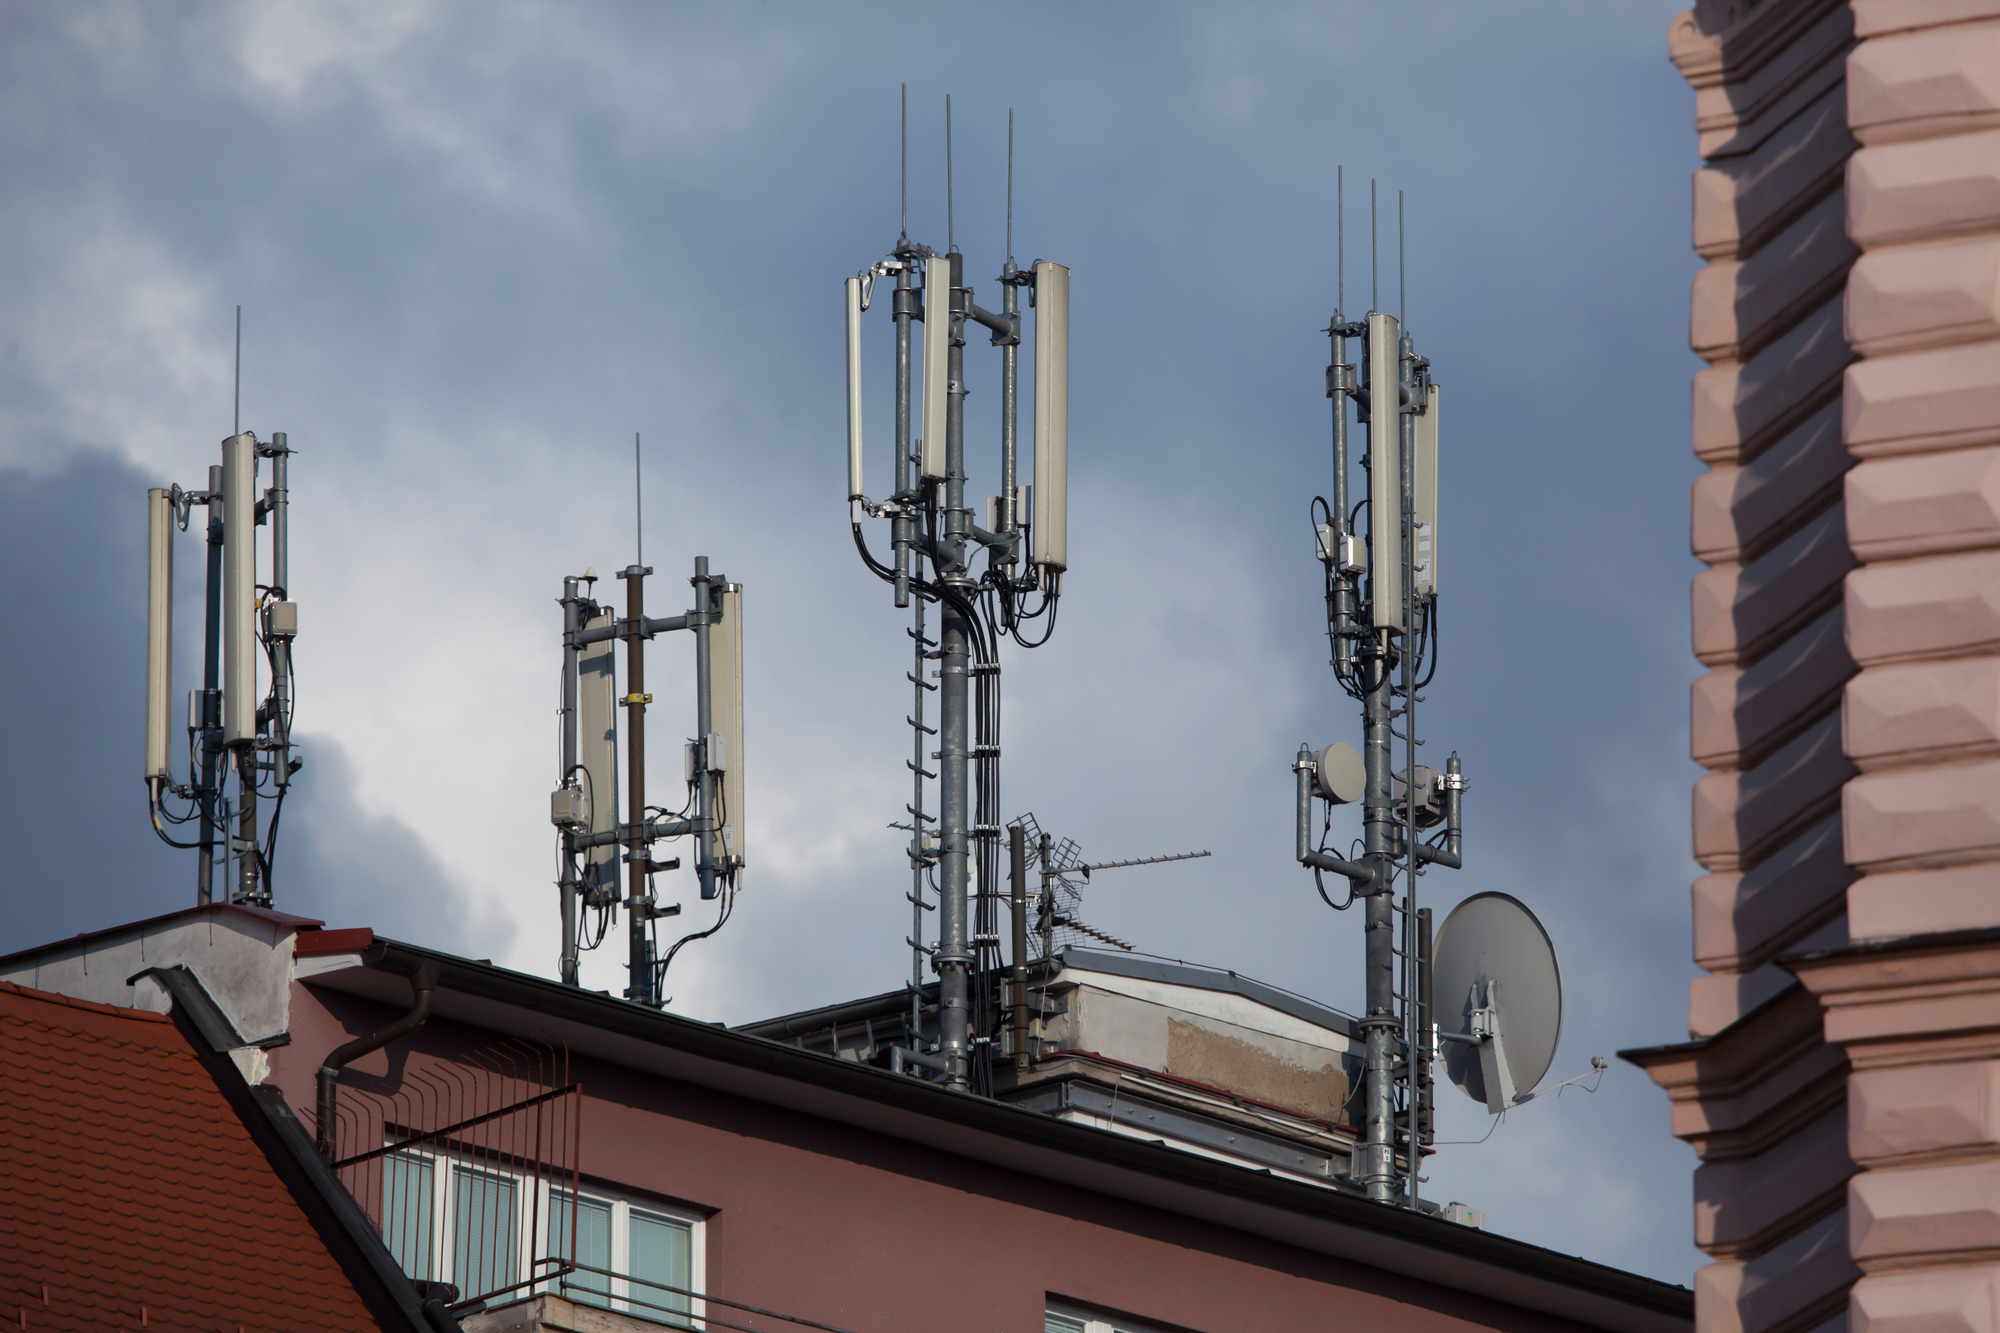 Mobile Tower Lease Agreement Landowners May Be Owed More Rent Money From Cell Tower Lease Rates